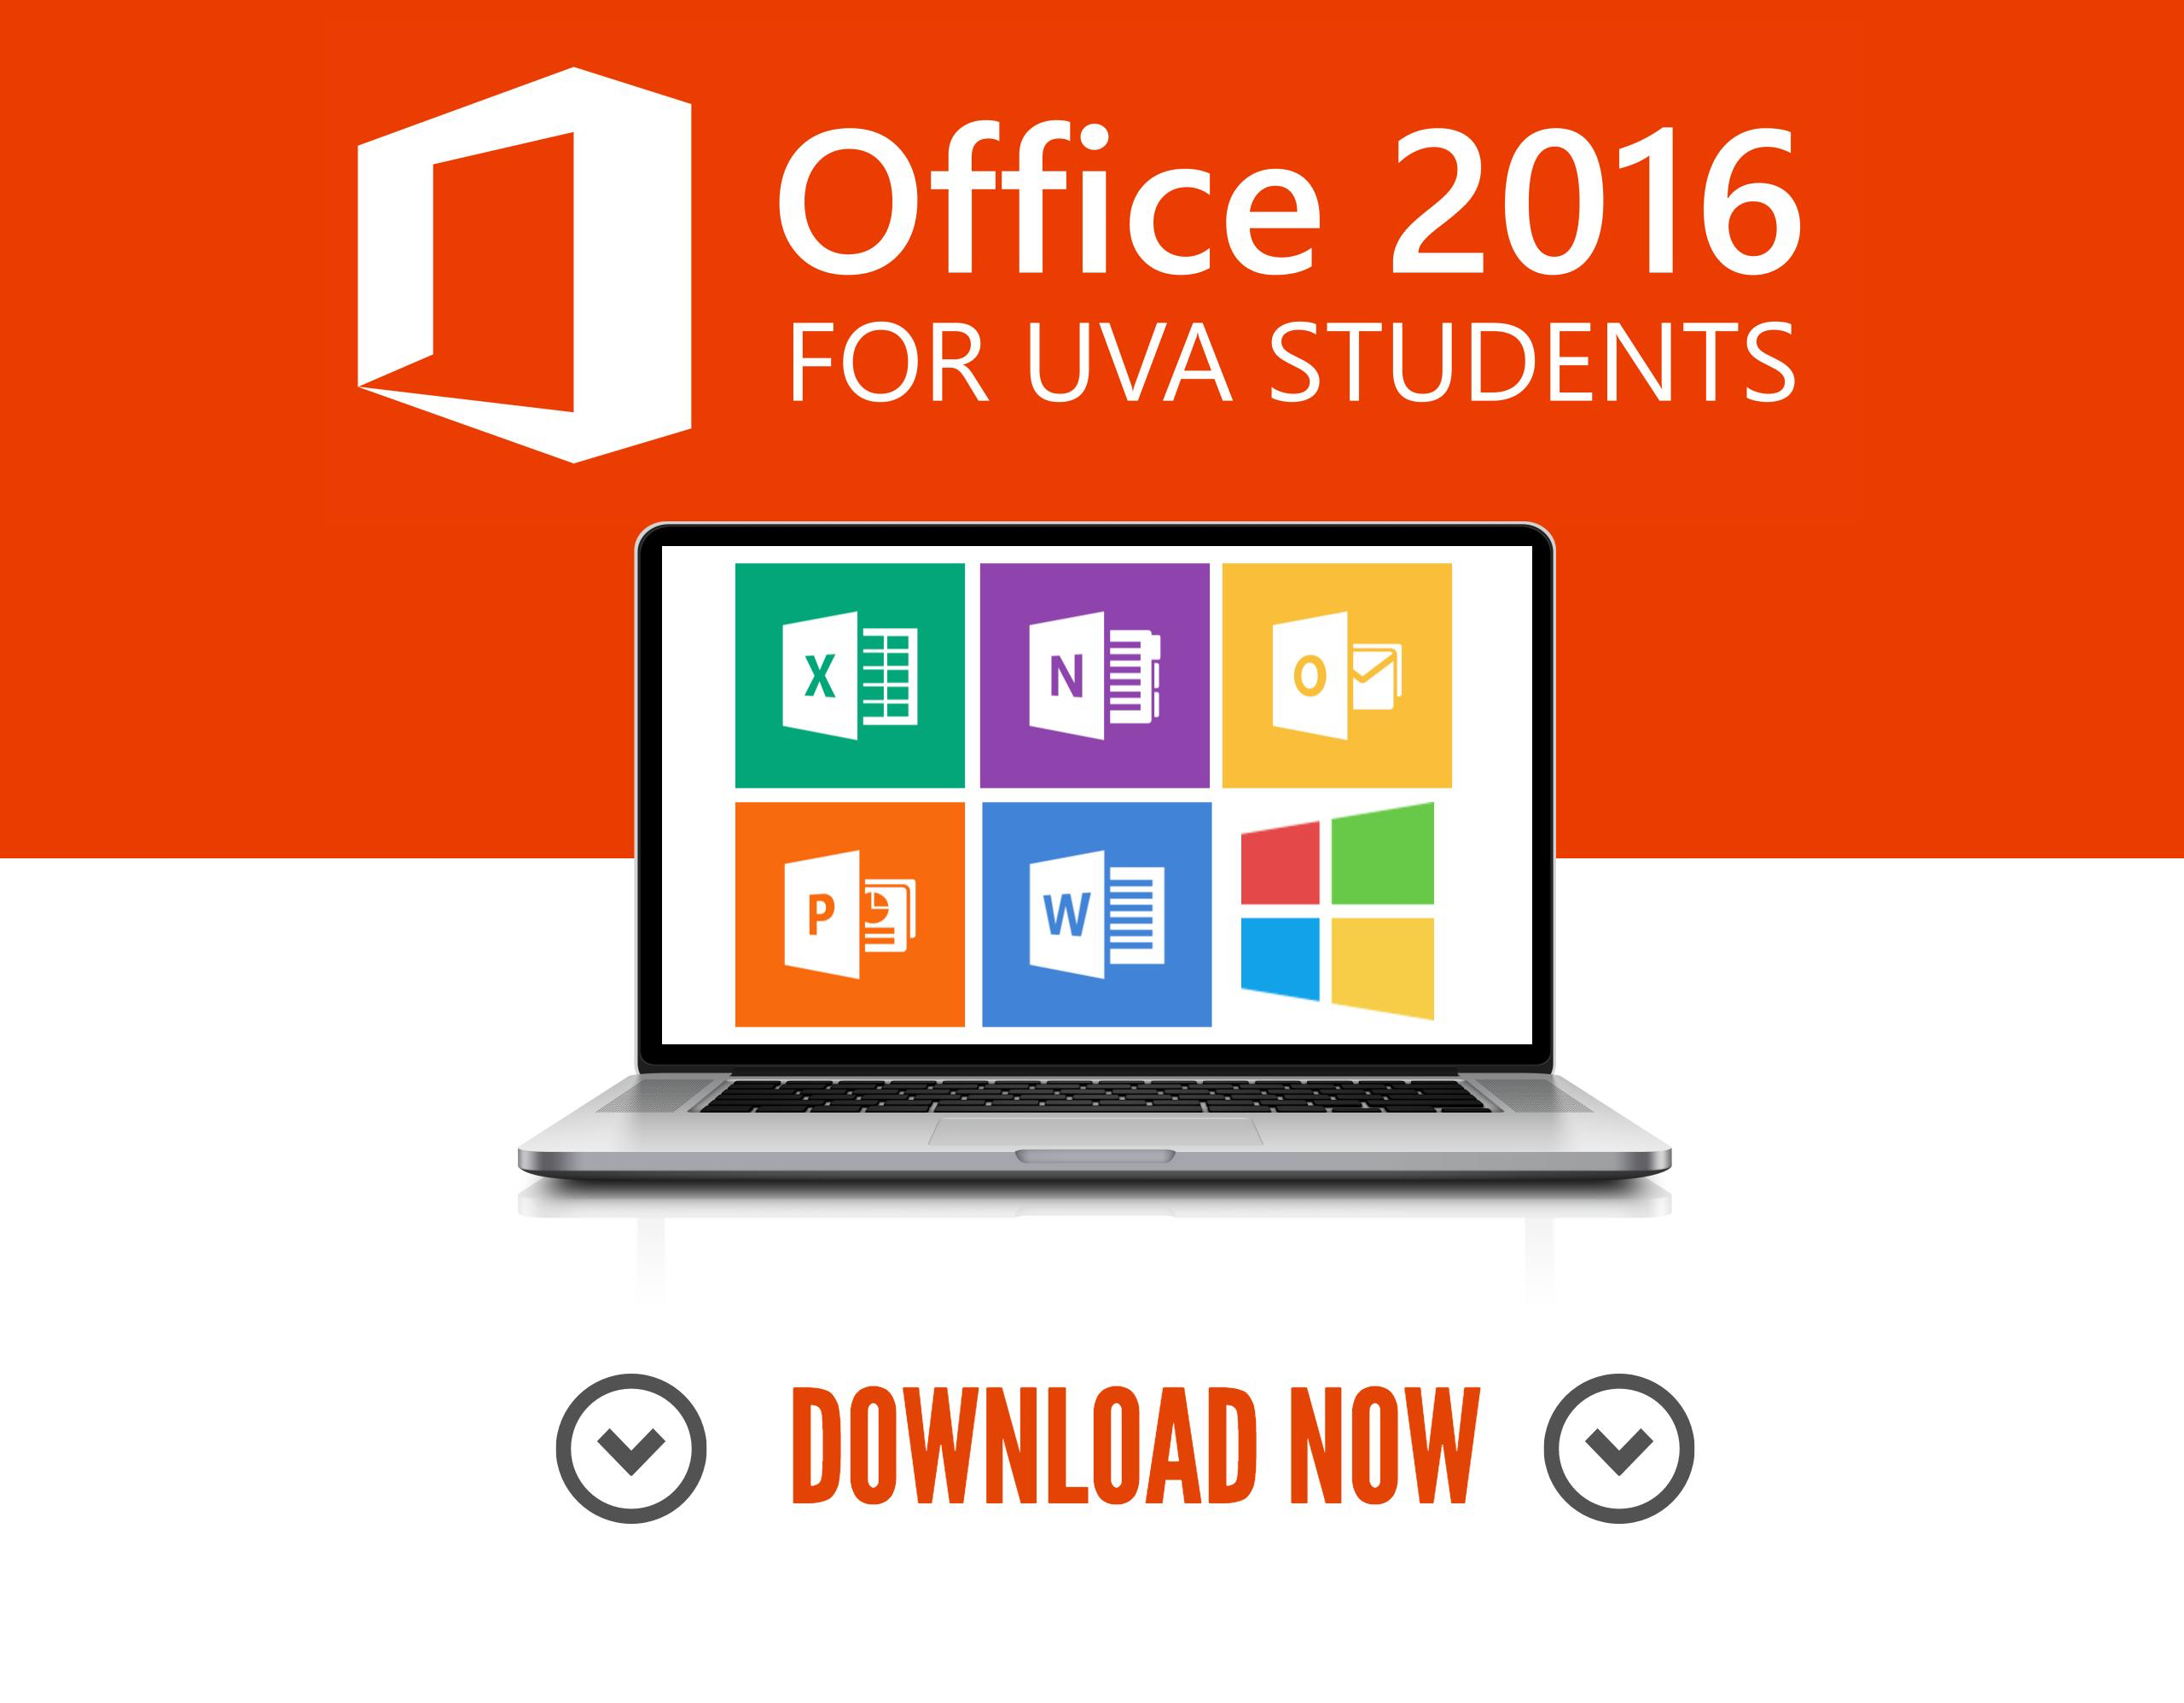 free microsoft office download for windows 10